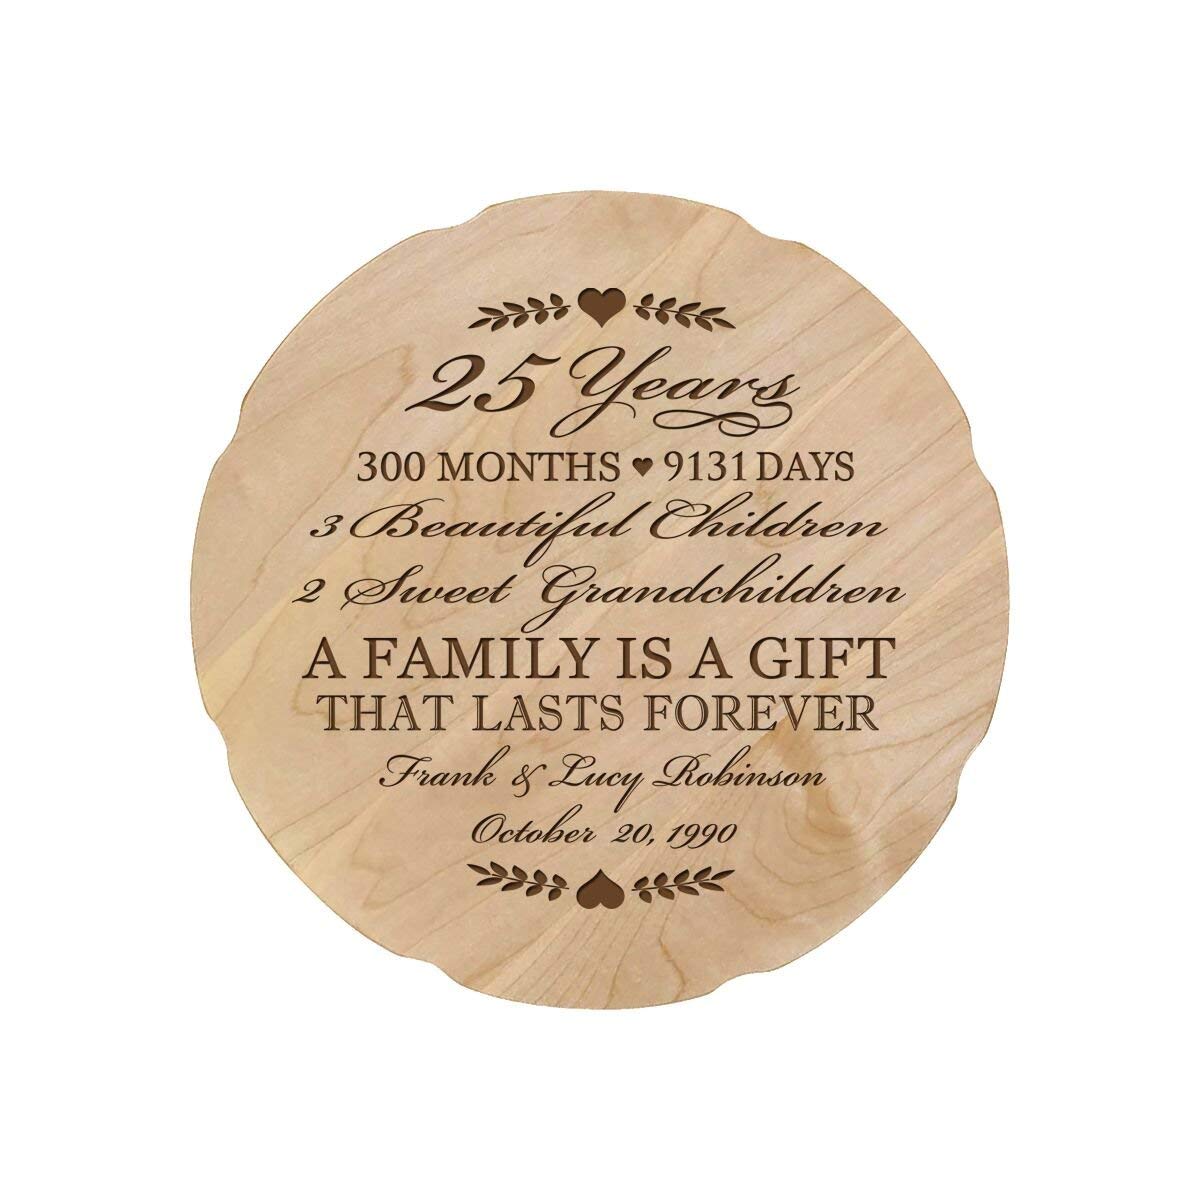 Personalized Wedding Anniversary Plate Decor Gift - Family Name - LifeSong Milestones